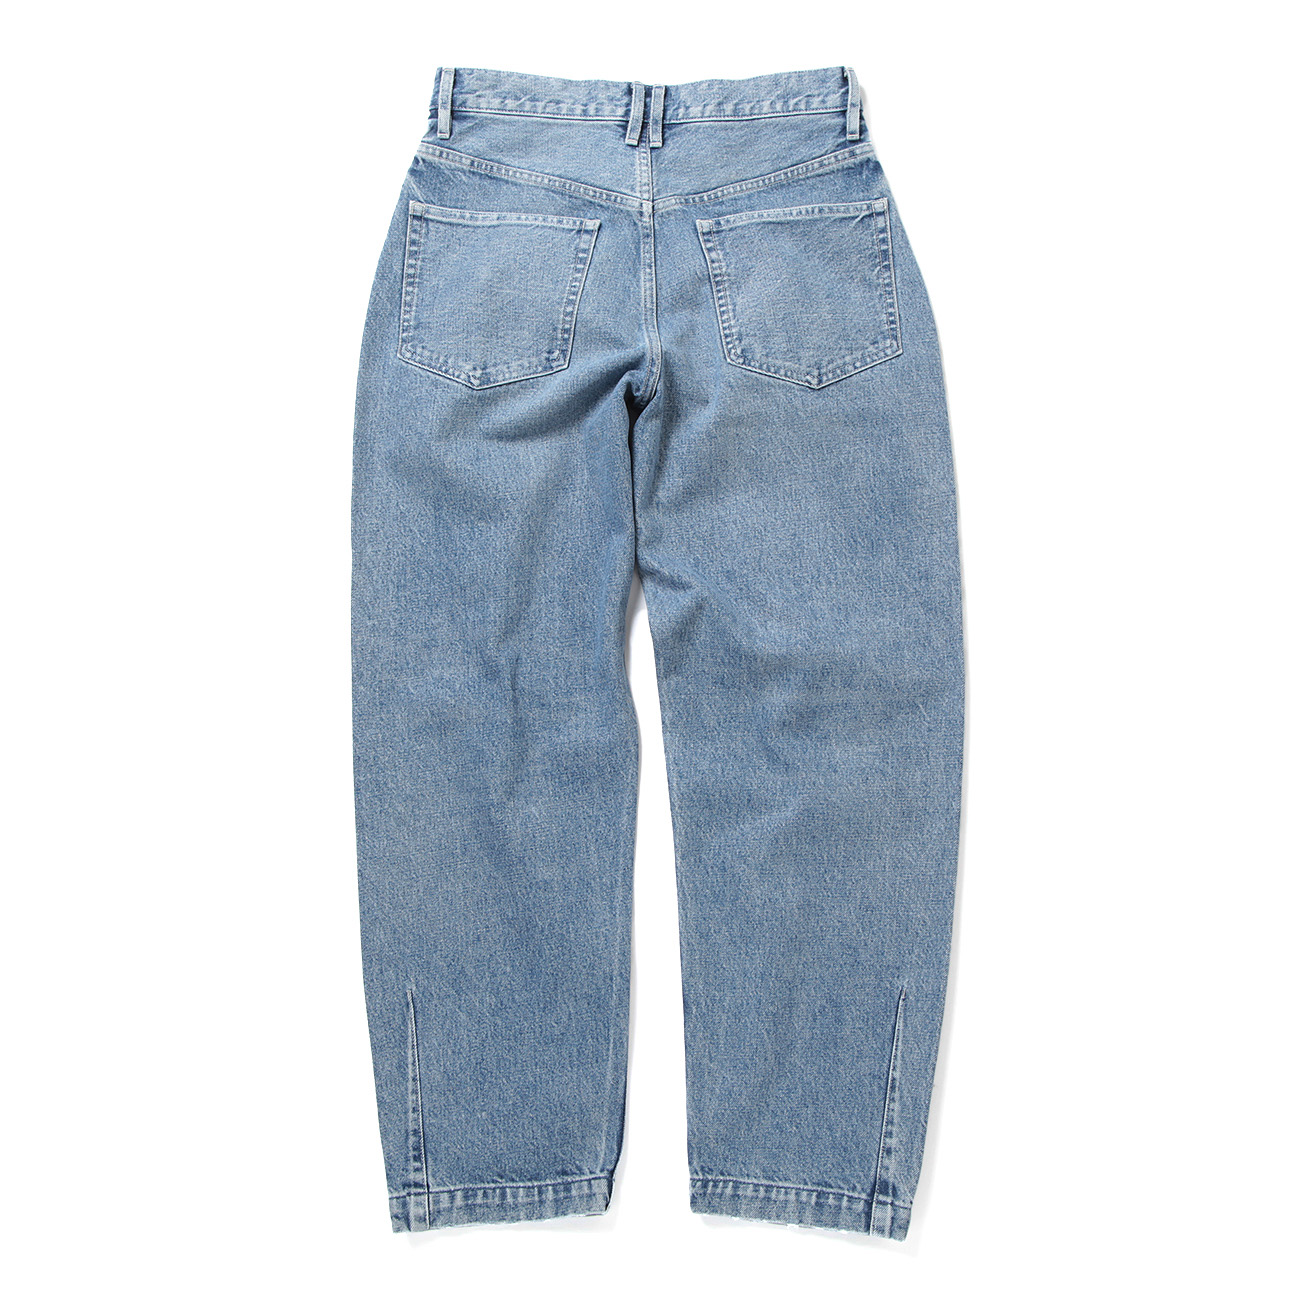 THE SKATE JEAN TROUSERS - MID BLUE